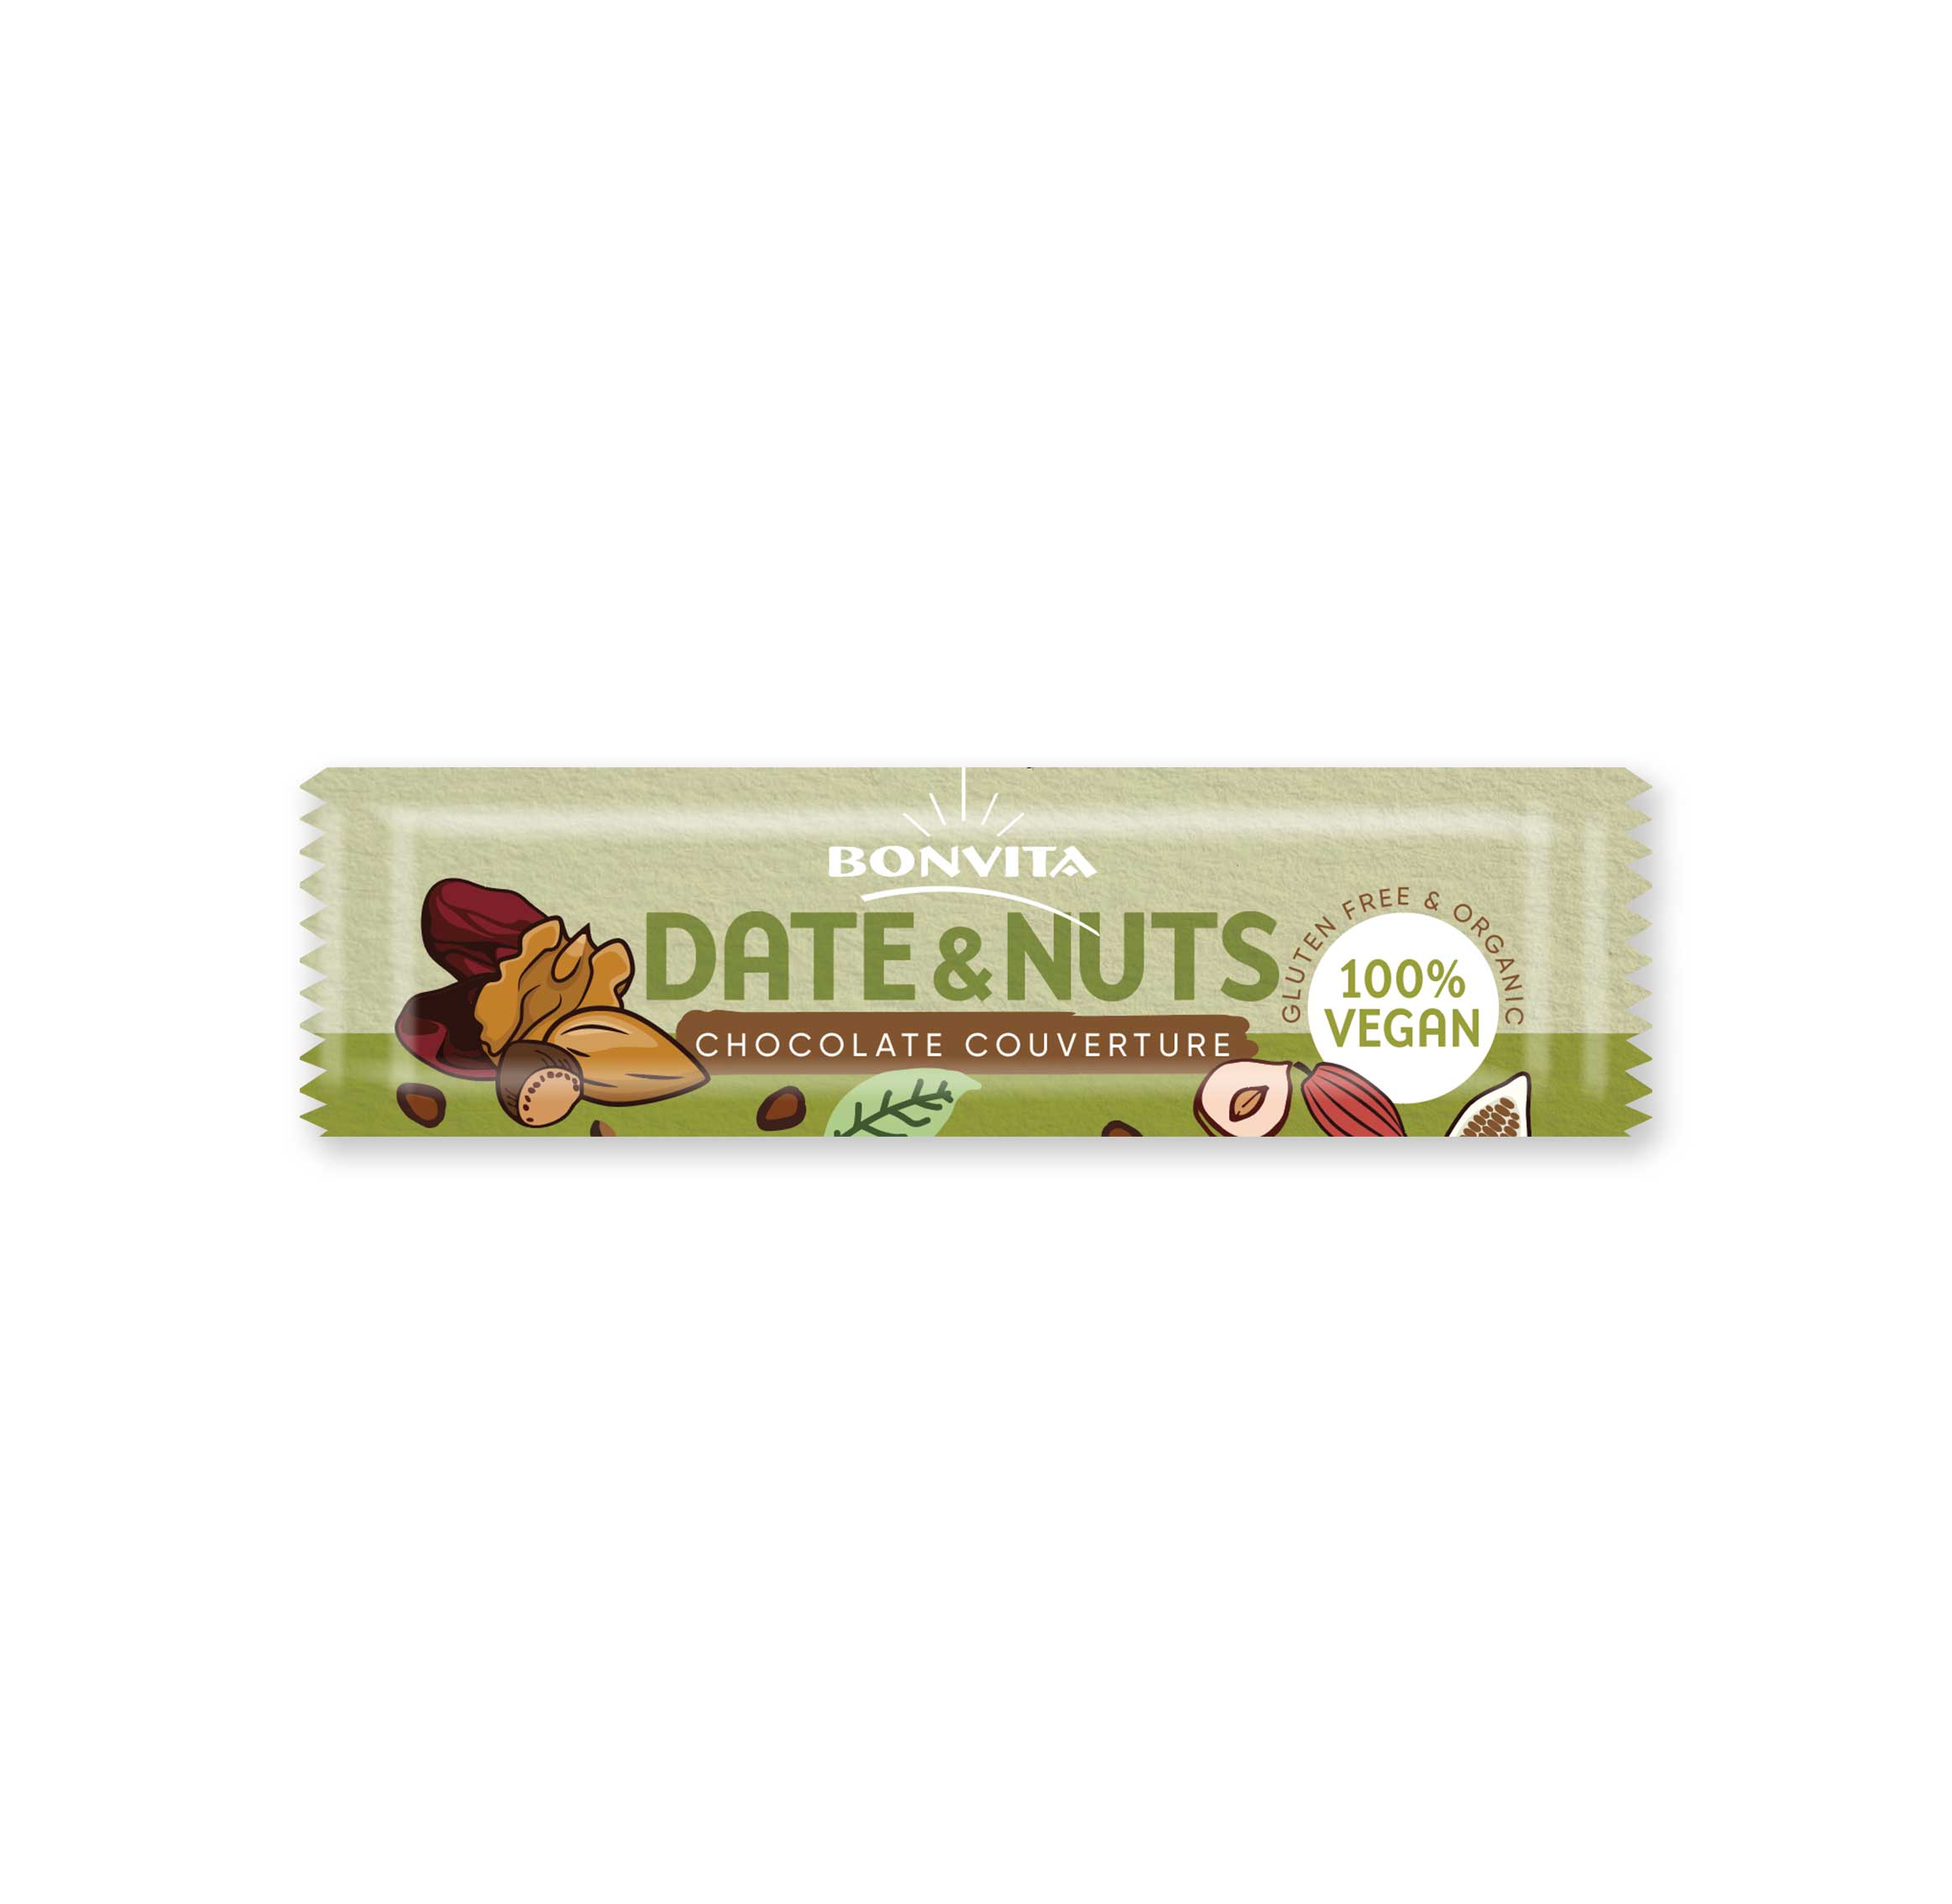 24x Chocolate couverture Date 'n Nuts